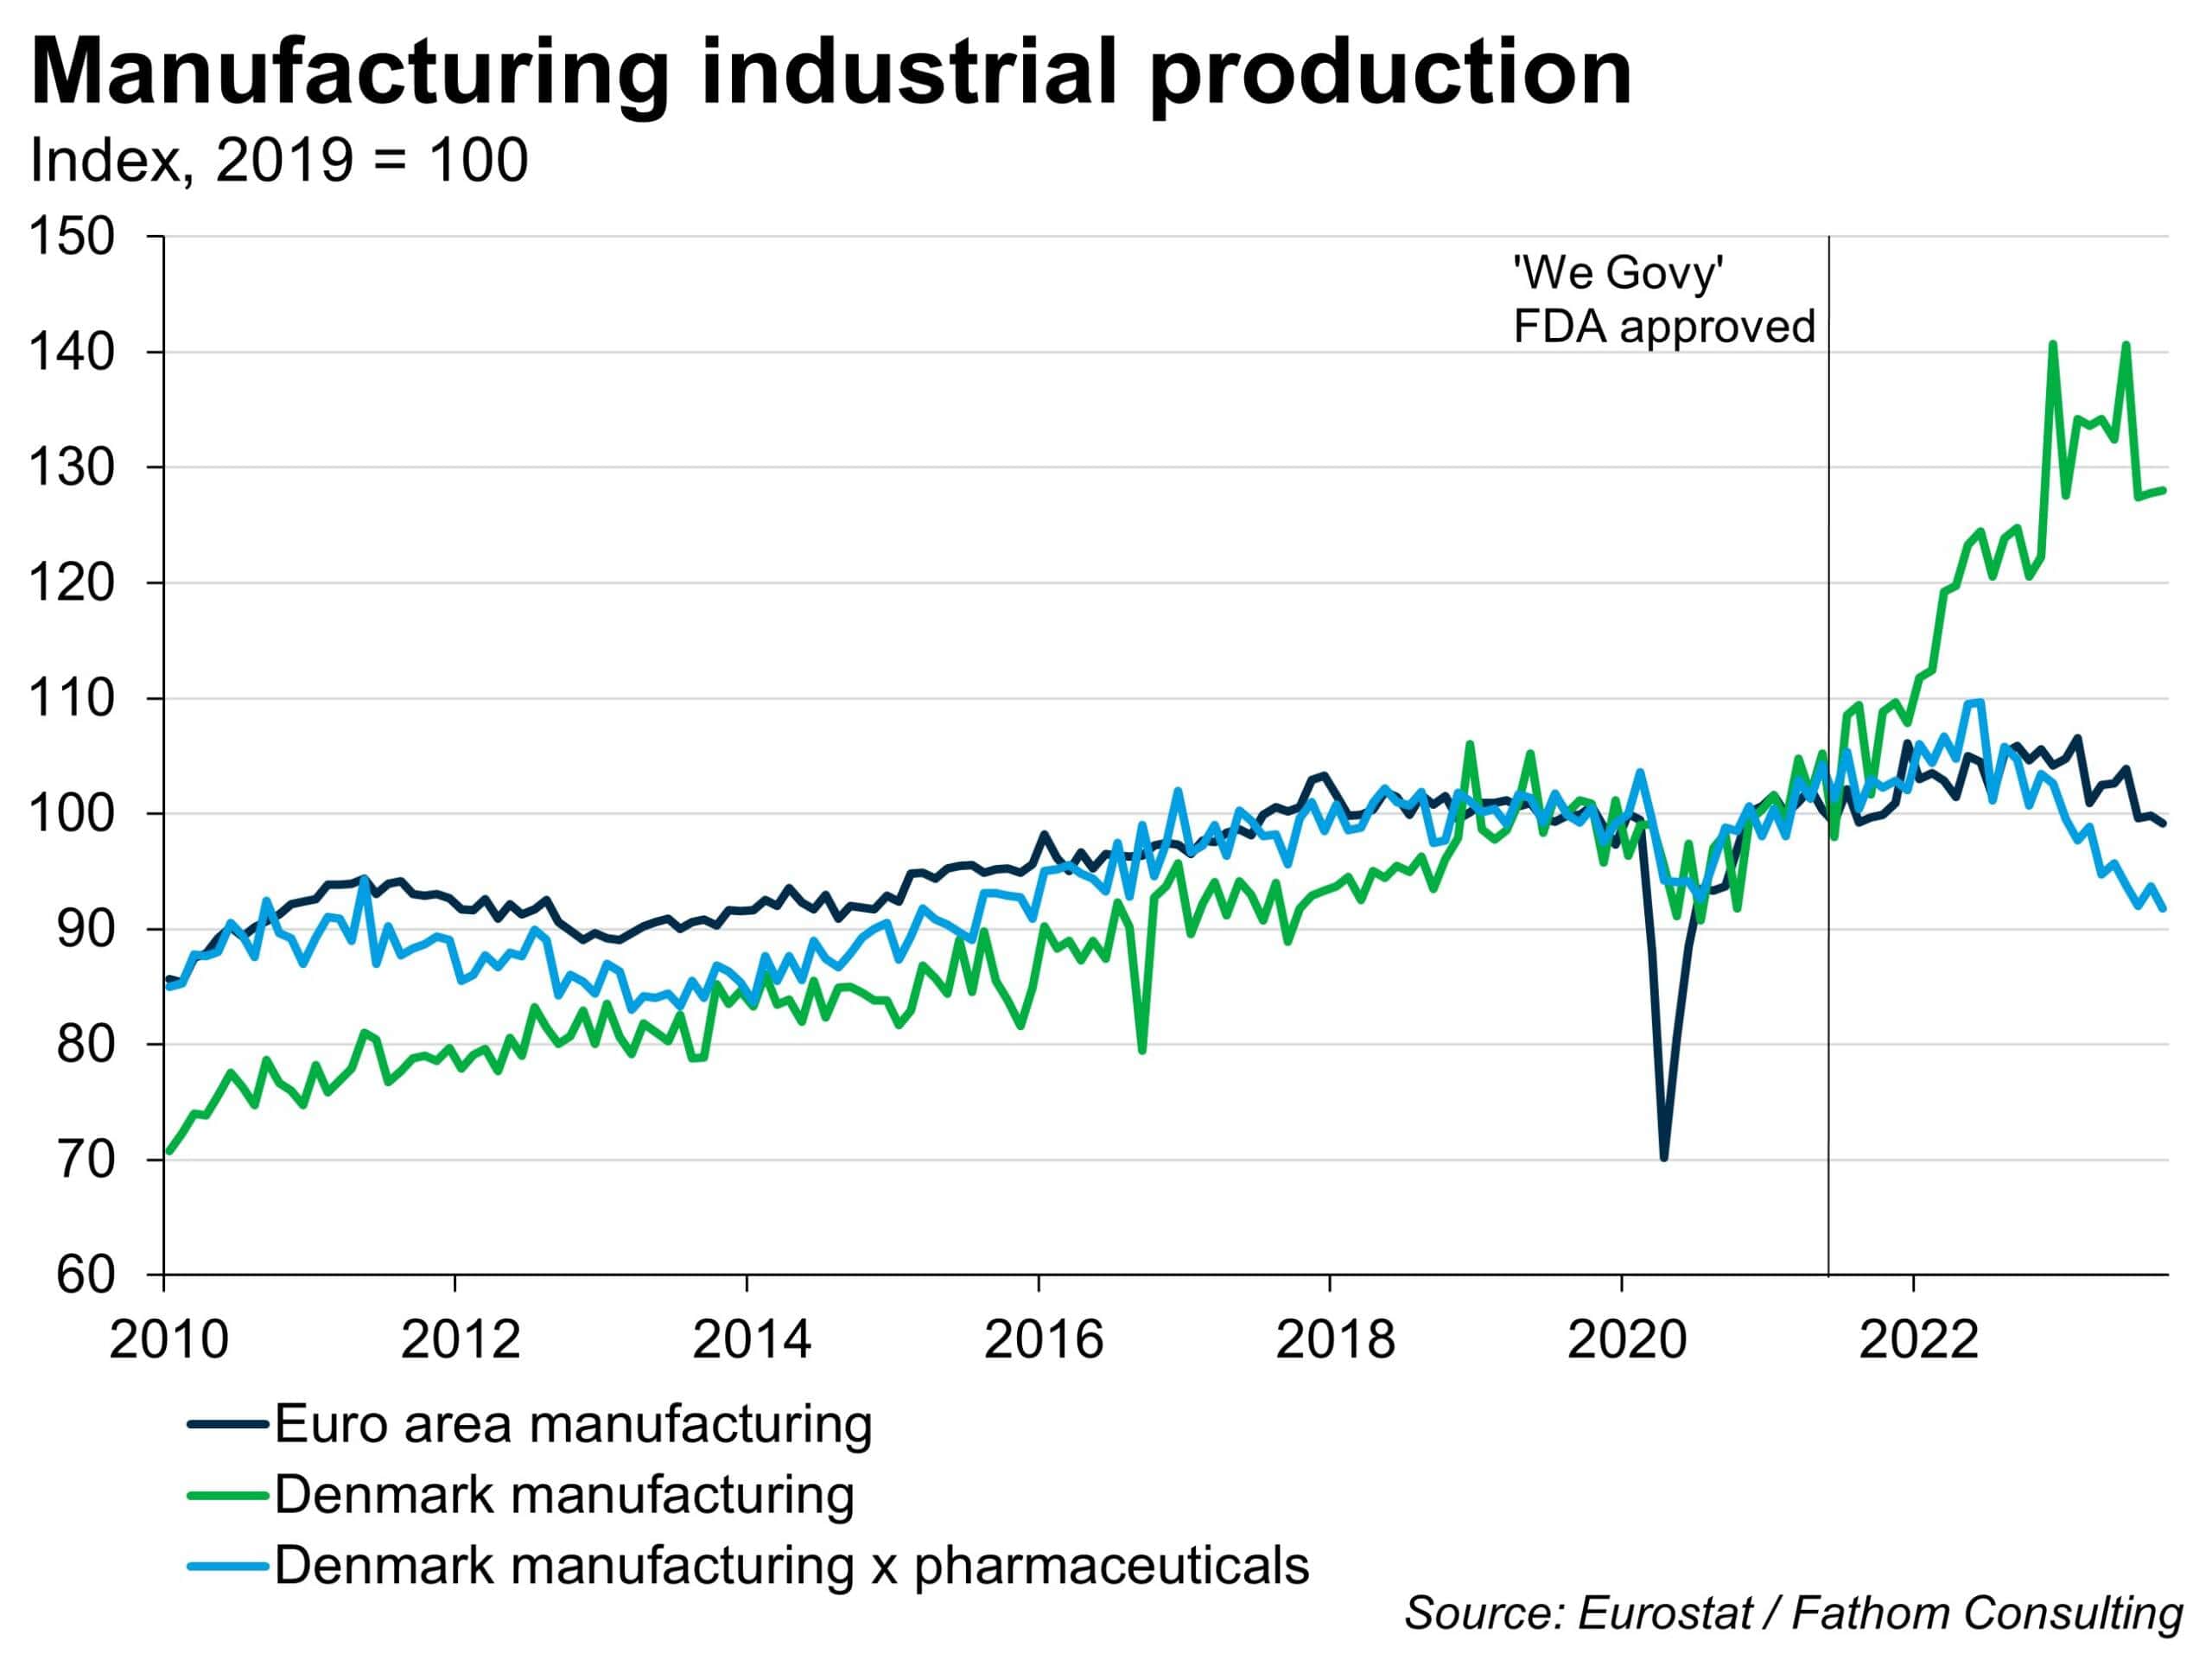 Manufacturing industrial production for manufacturing in the euro area comparative to Denmark, with and without pharmaceuticals contribution